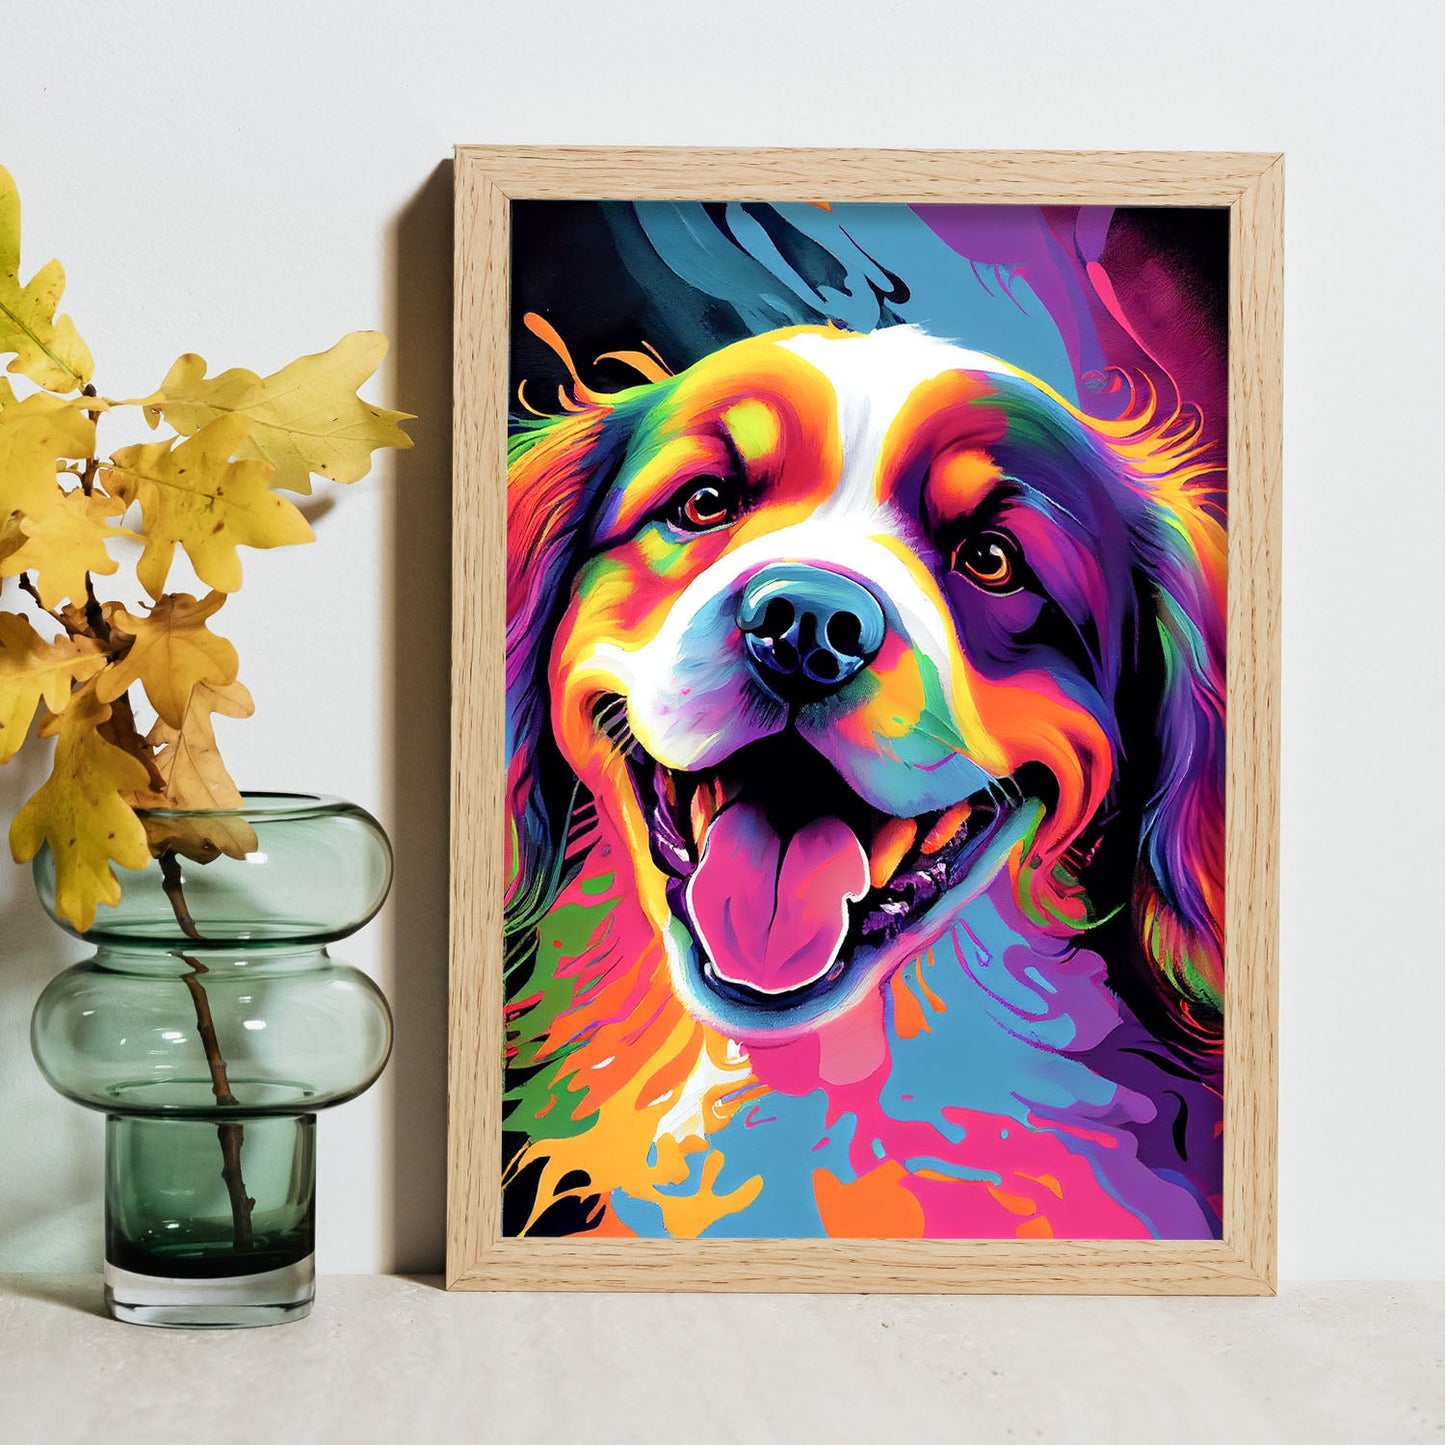 Nacnic Abstract smiling Dog in Lisa Fran Style_2. Aesthetic Wall Art Prints for Bedroom or Living Room Design.